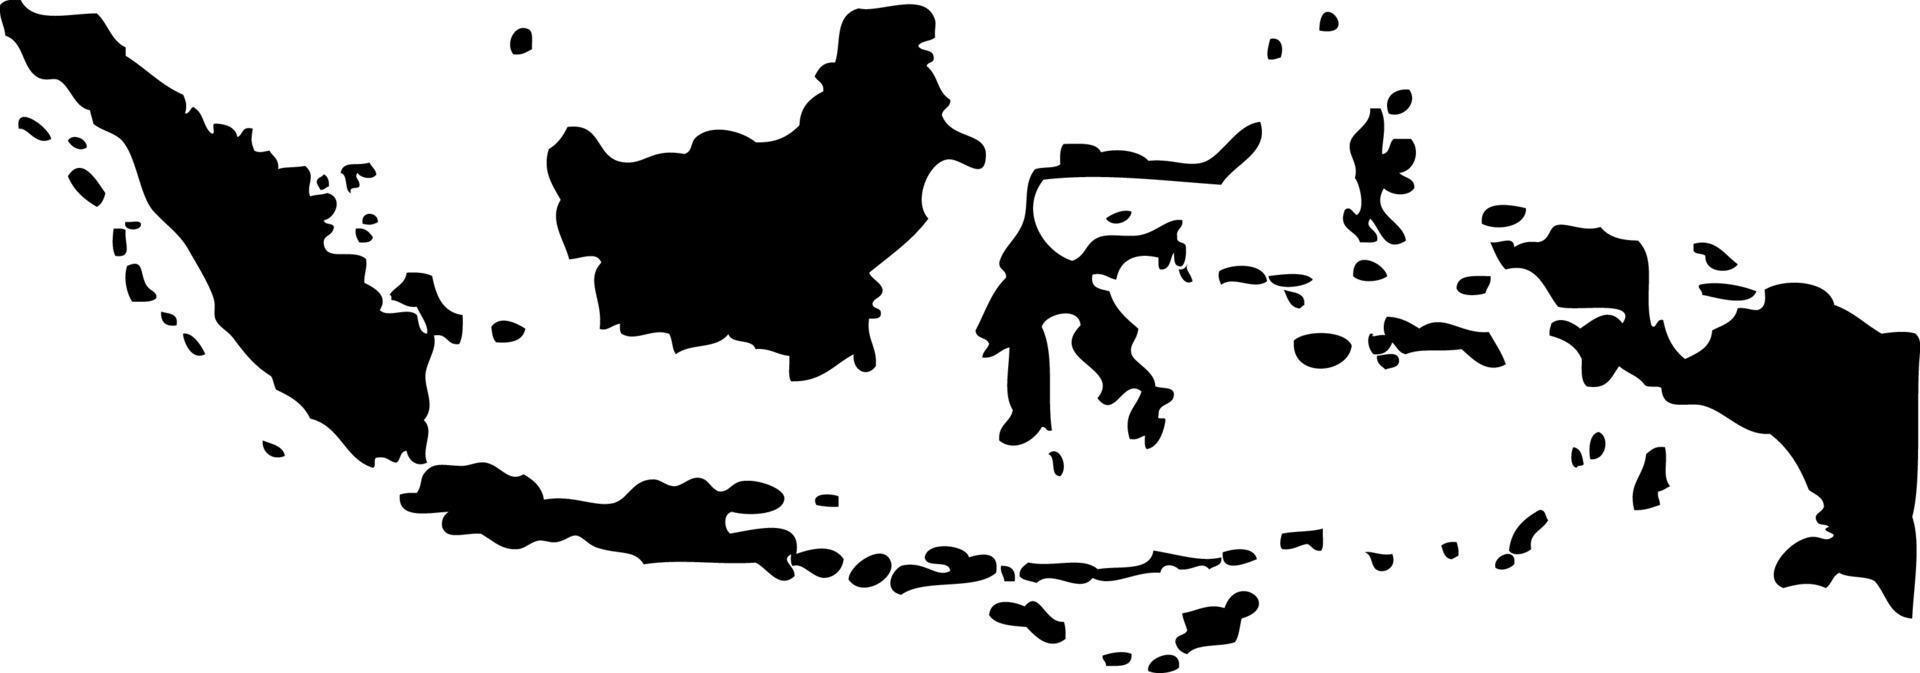 Asia Indonesia vector map.Hand drawn minimalism style.